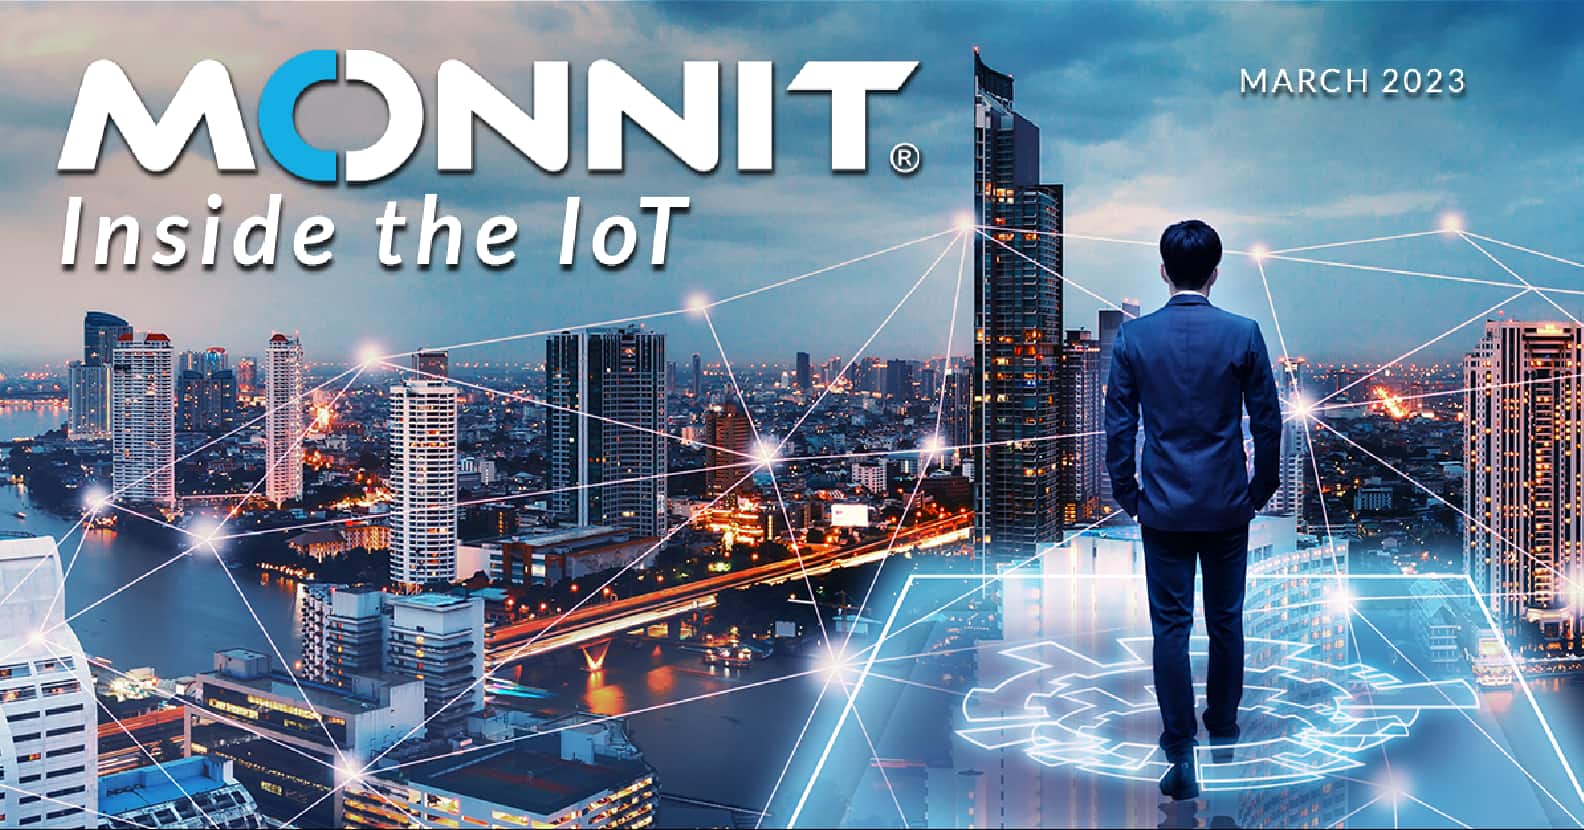 Monnit: Inside the IoT March 2023